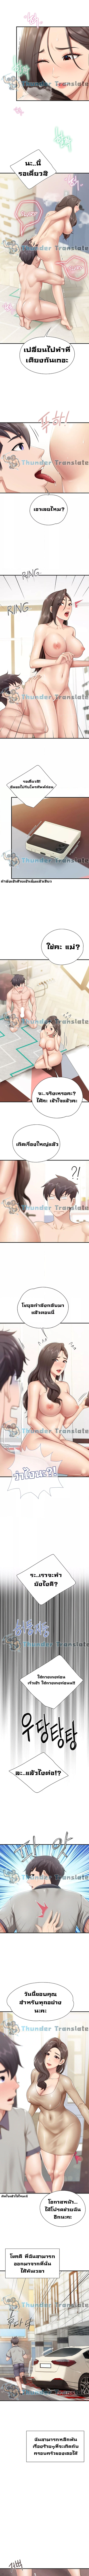 Welcome To Kids Cafe’ 20 ภาพ 2